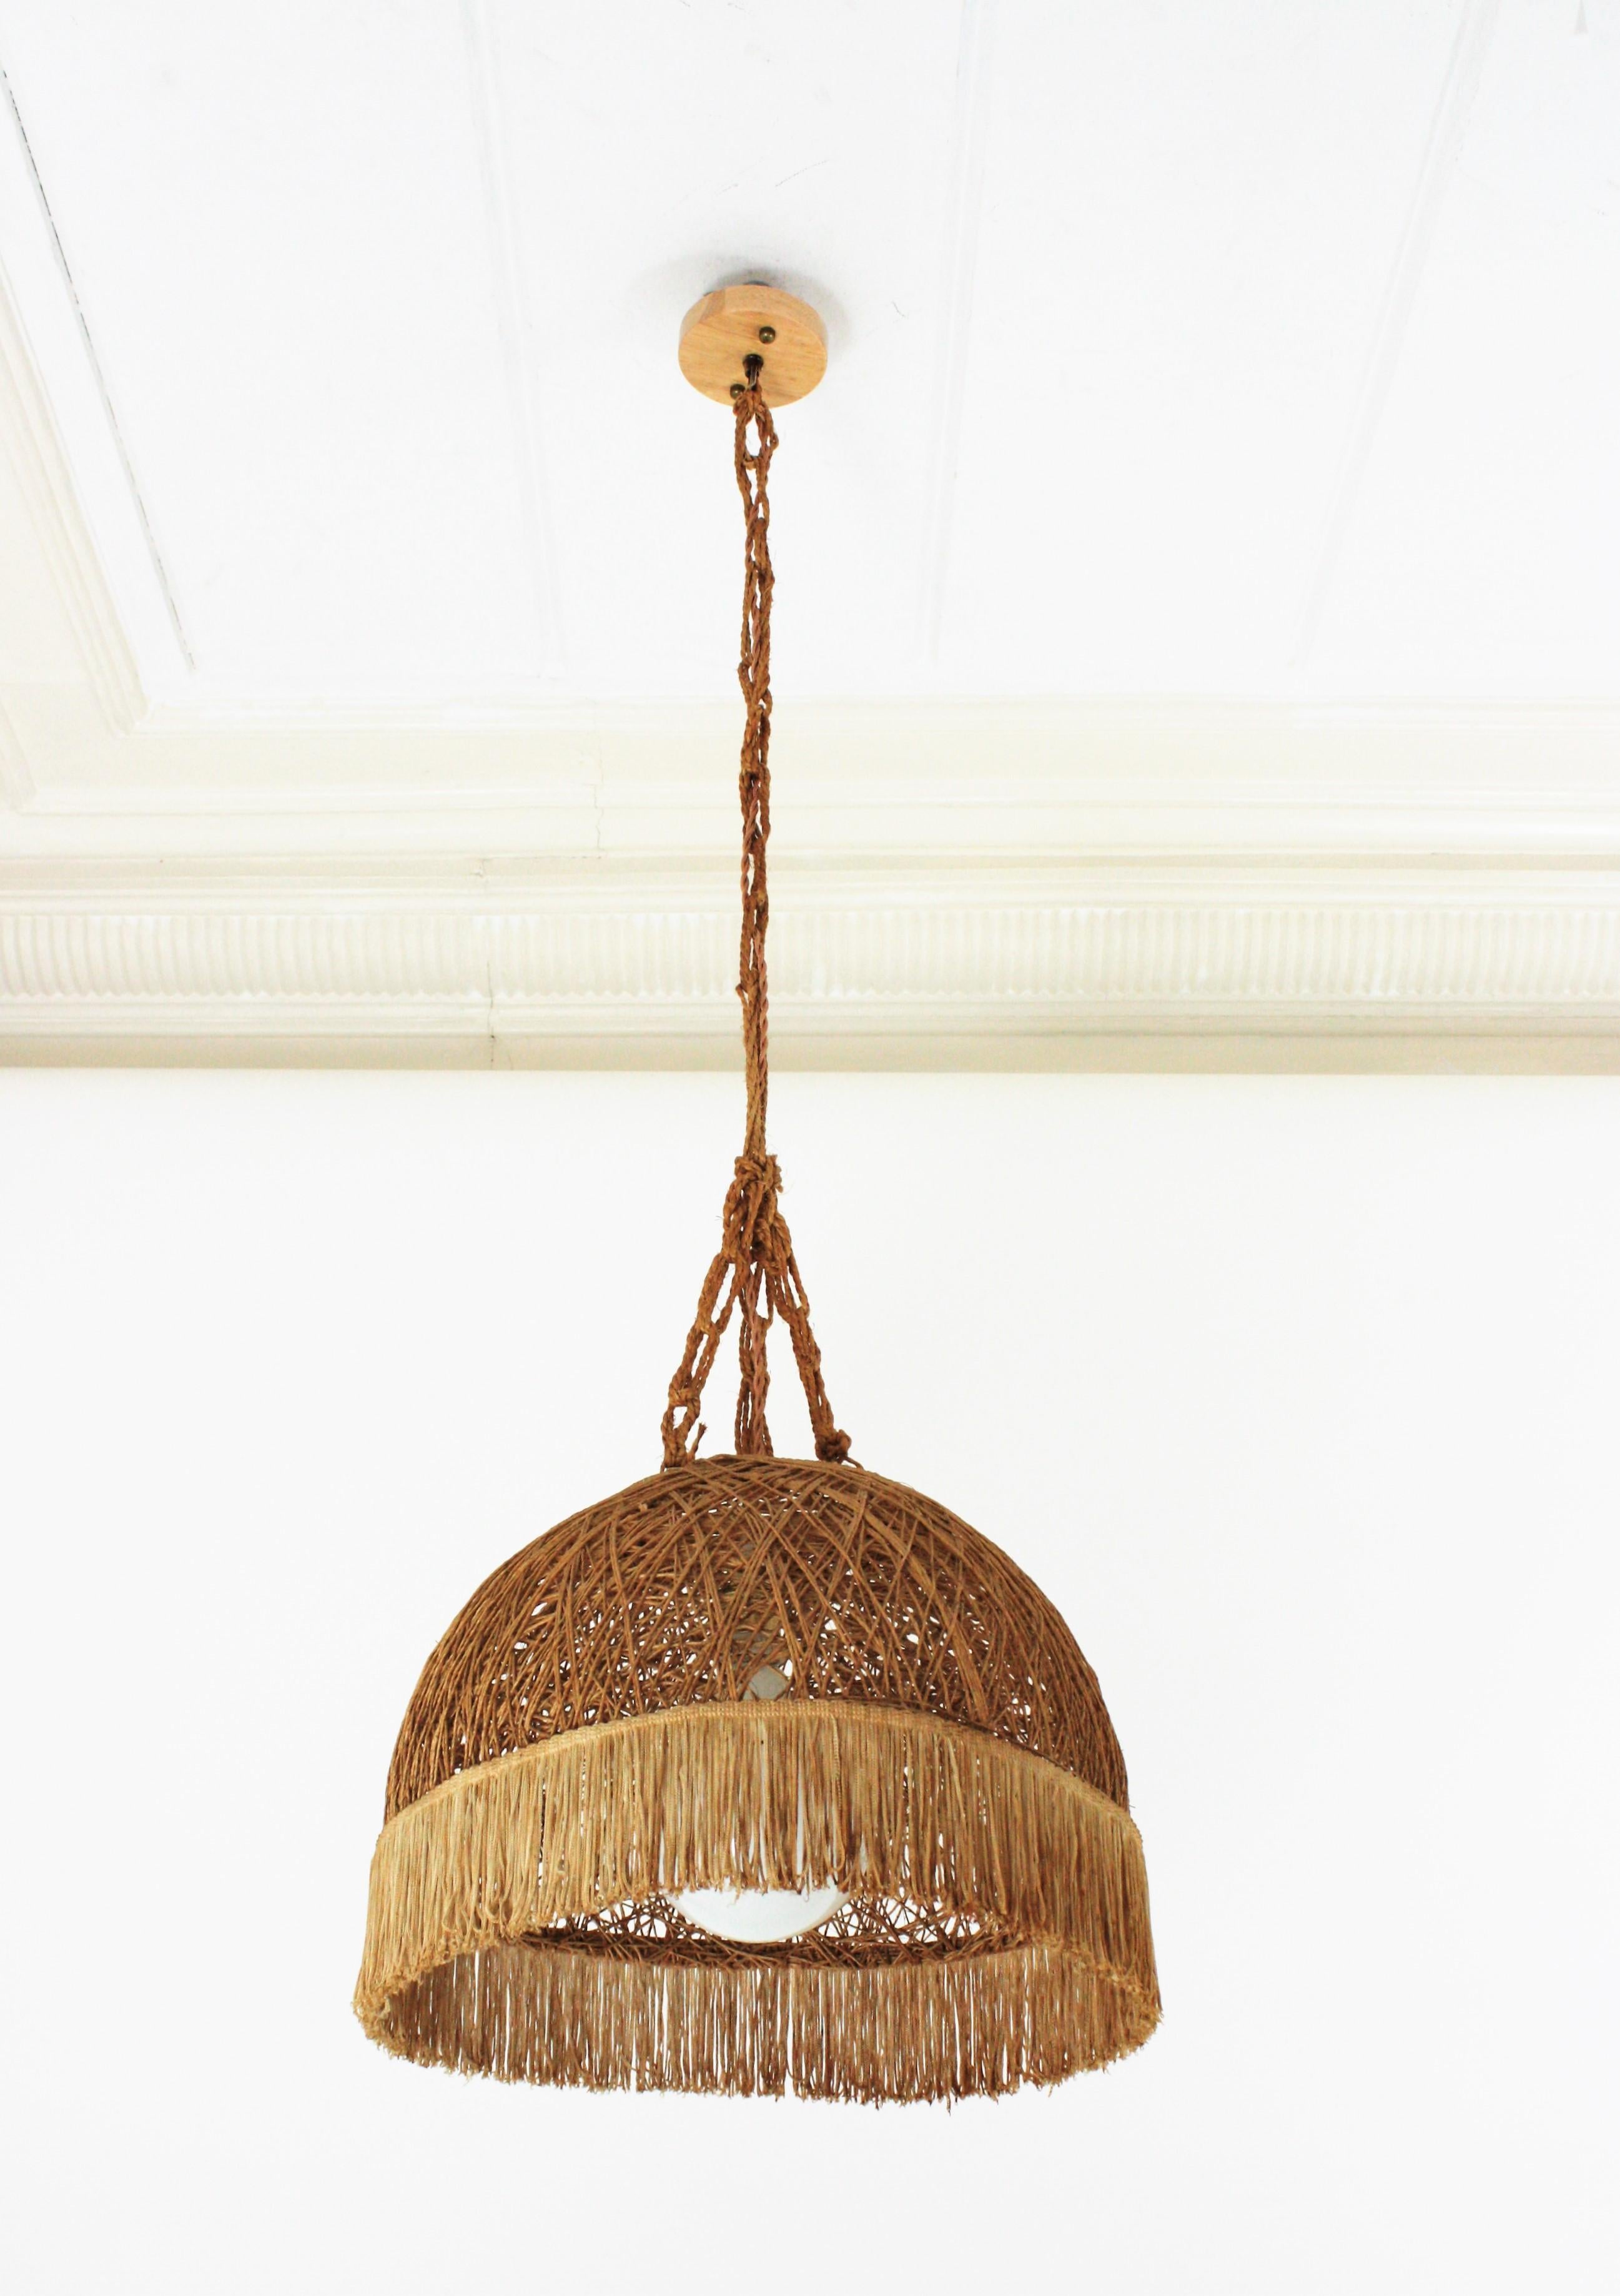 Dome Shaped Pendant Hanging Light, Rope, Jute, Fringe. Spain, 1960s
Rare suspension with hand-woven cord semi-sphere lampshade hanging from a rope chain and topped by a woden canopy.
Place it hanging over a kitchen's table or dining area on in any